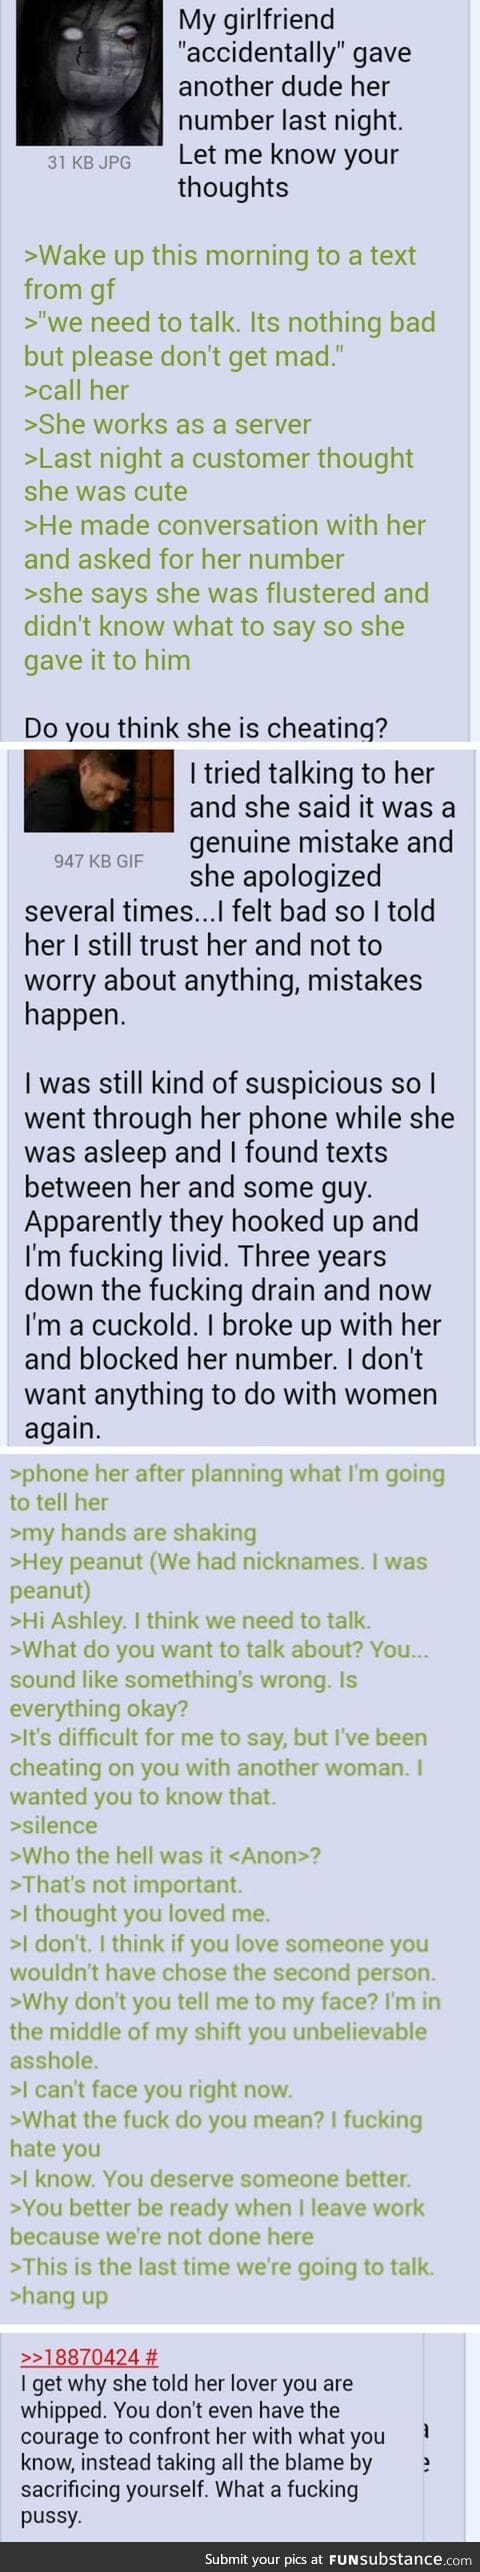 Girlfriend accidentally gives phone number